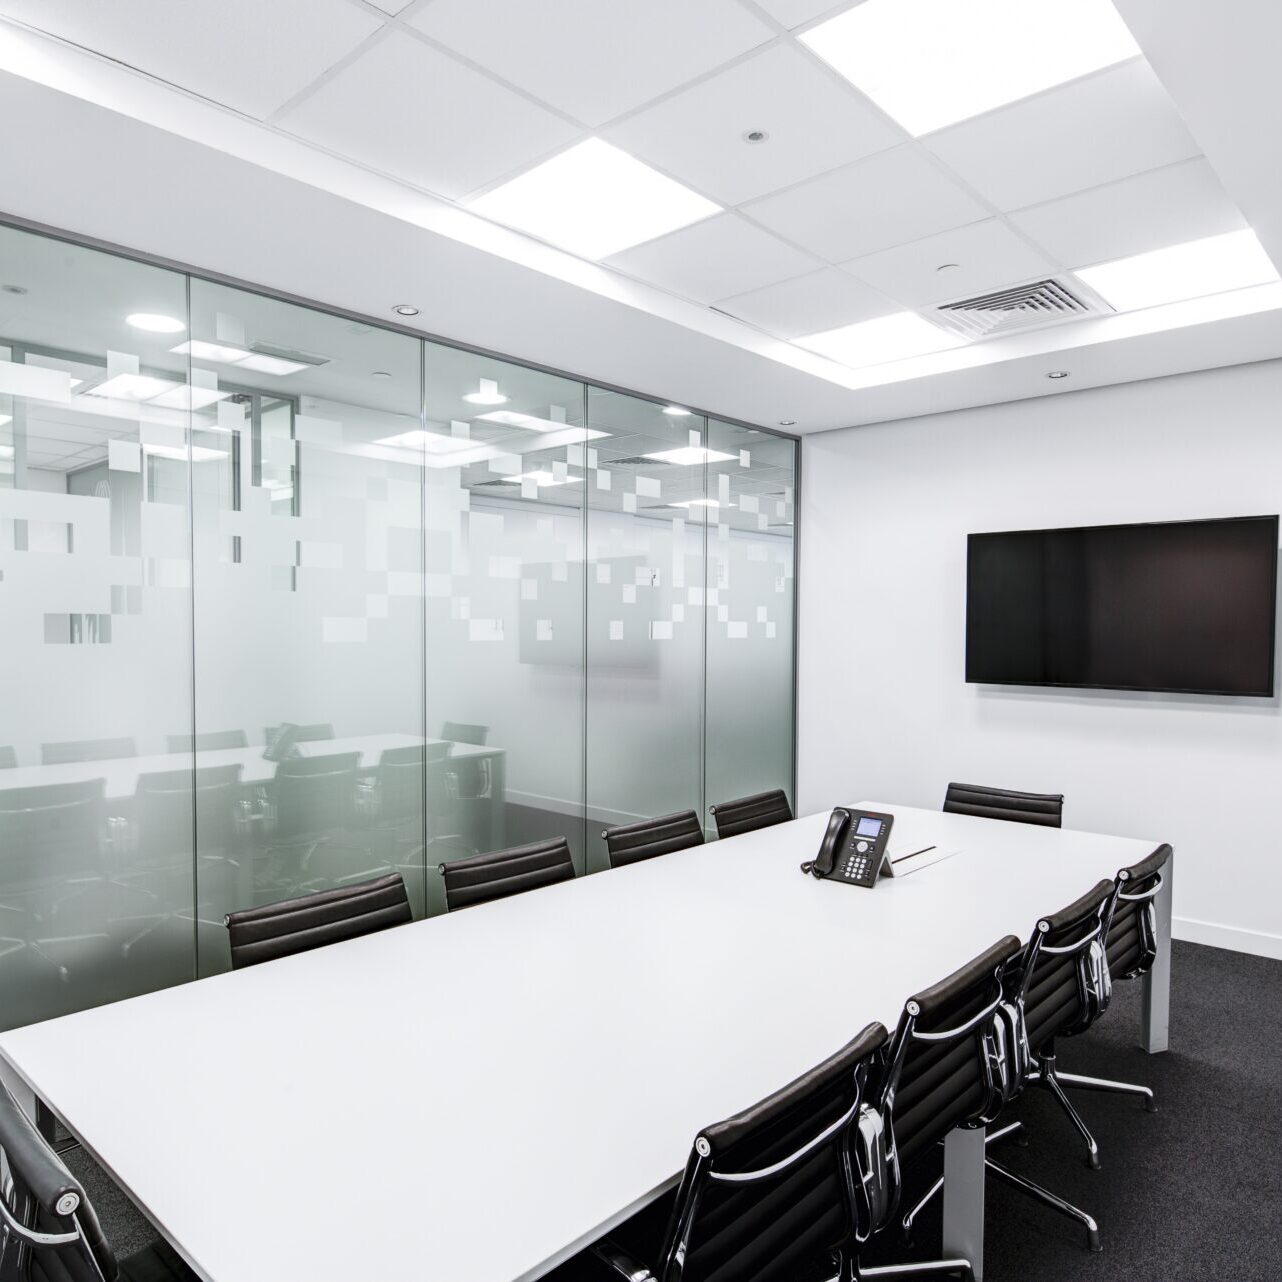 A conference room with glass walls and a white table.